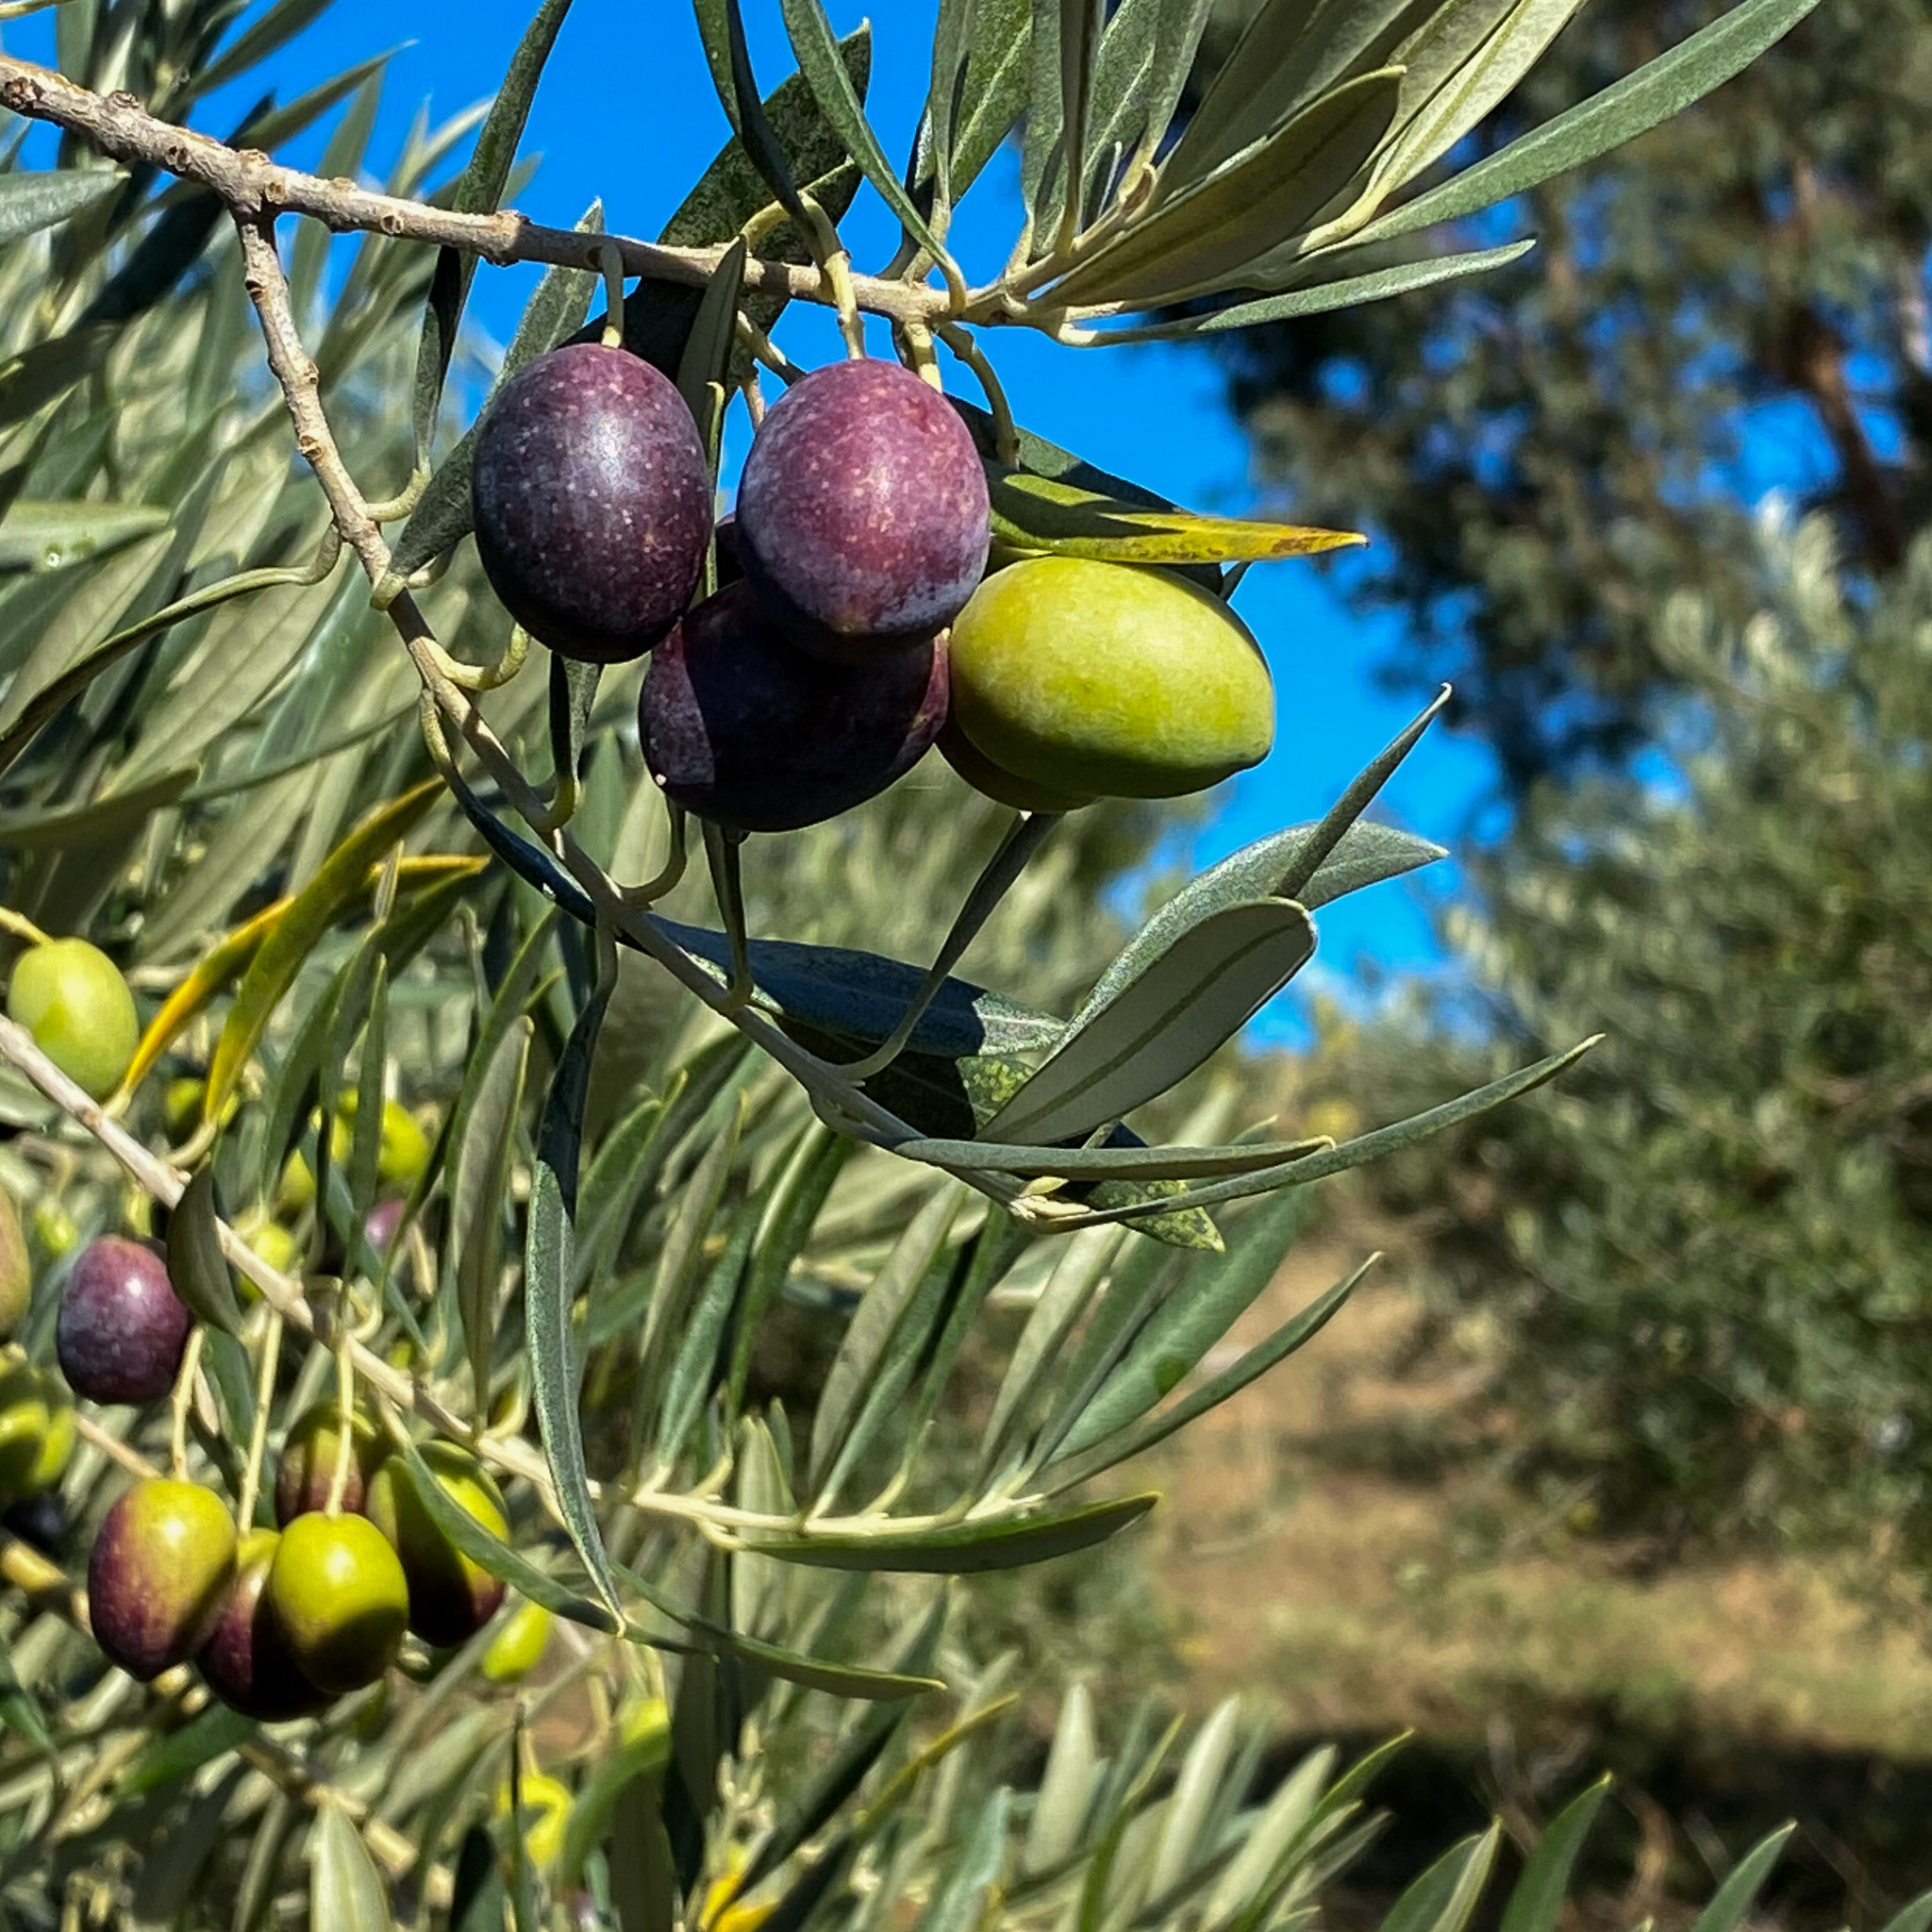 Australian olives black and green on tree with blue sky